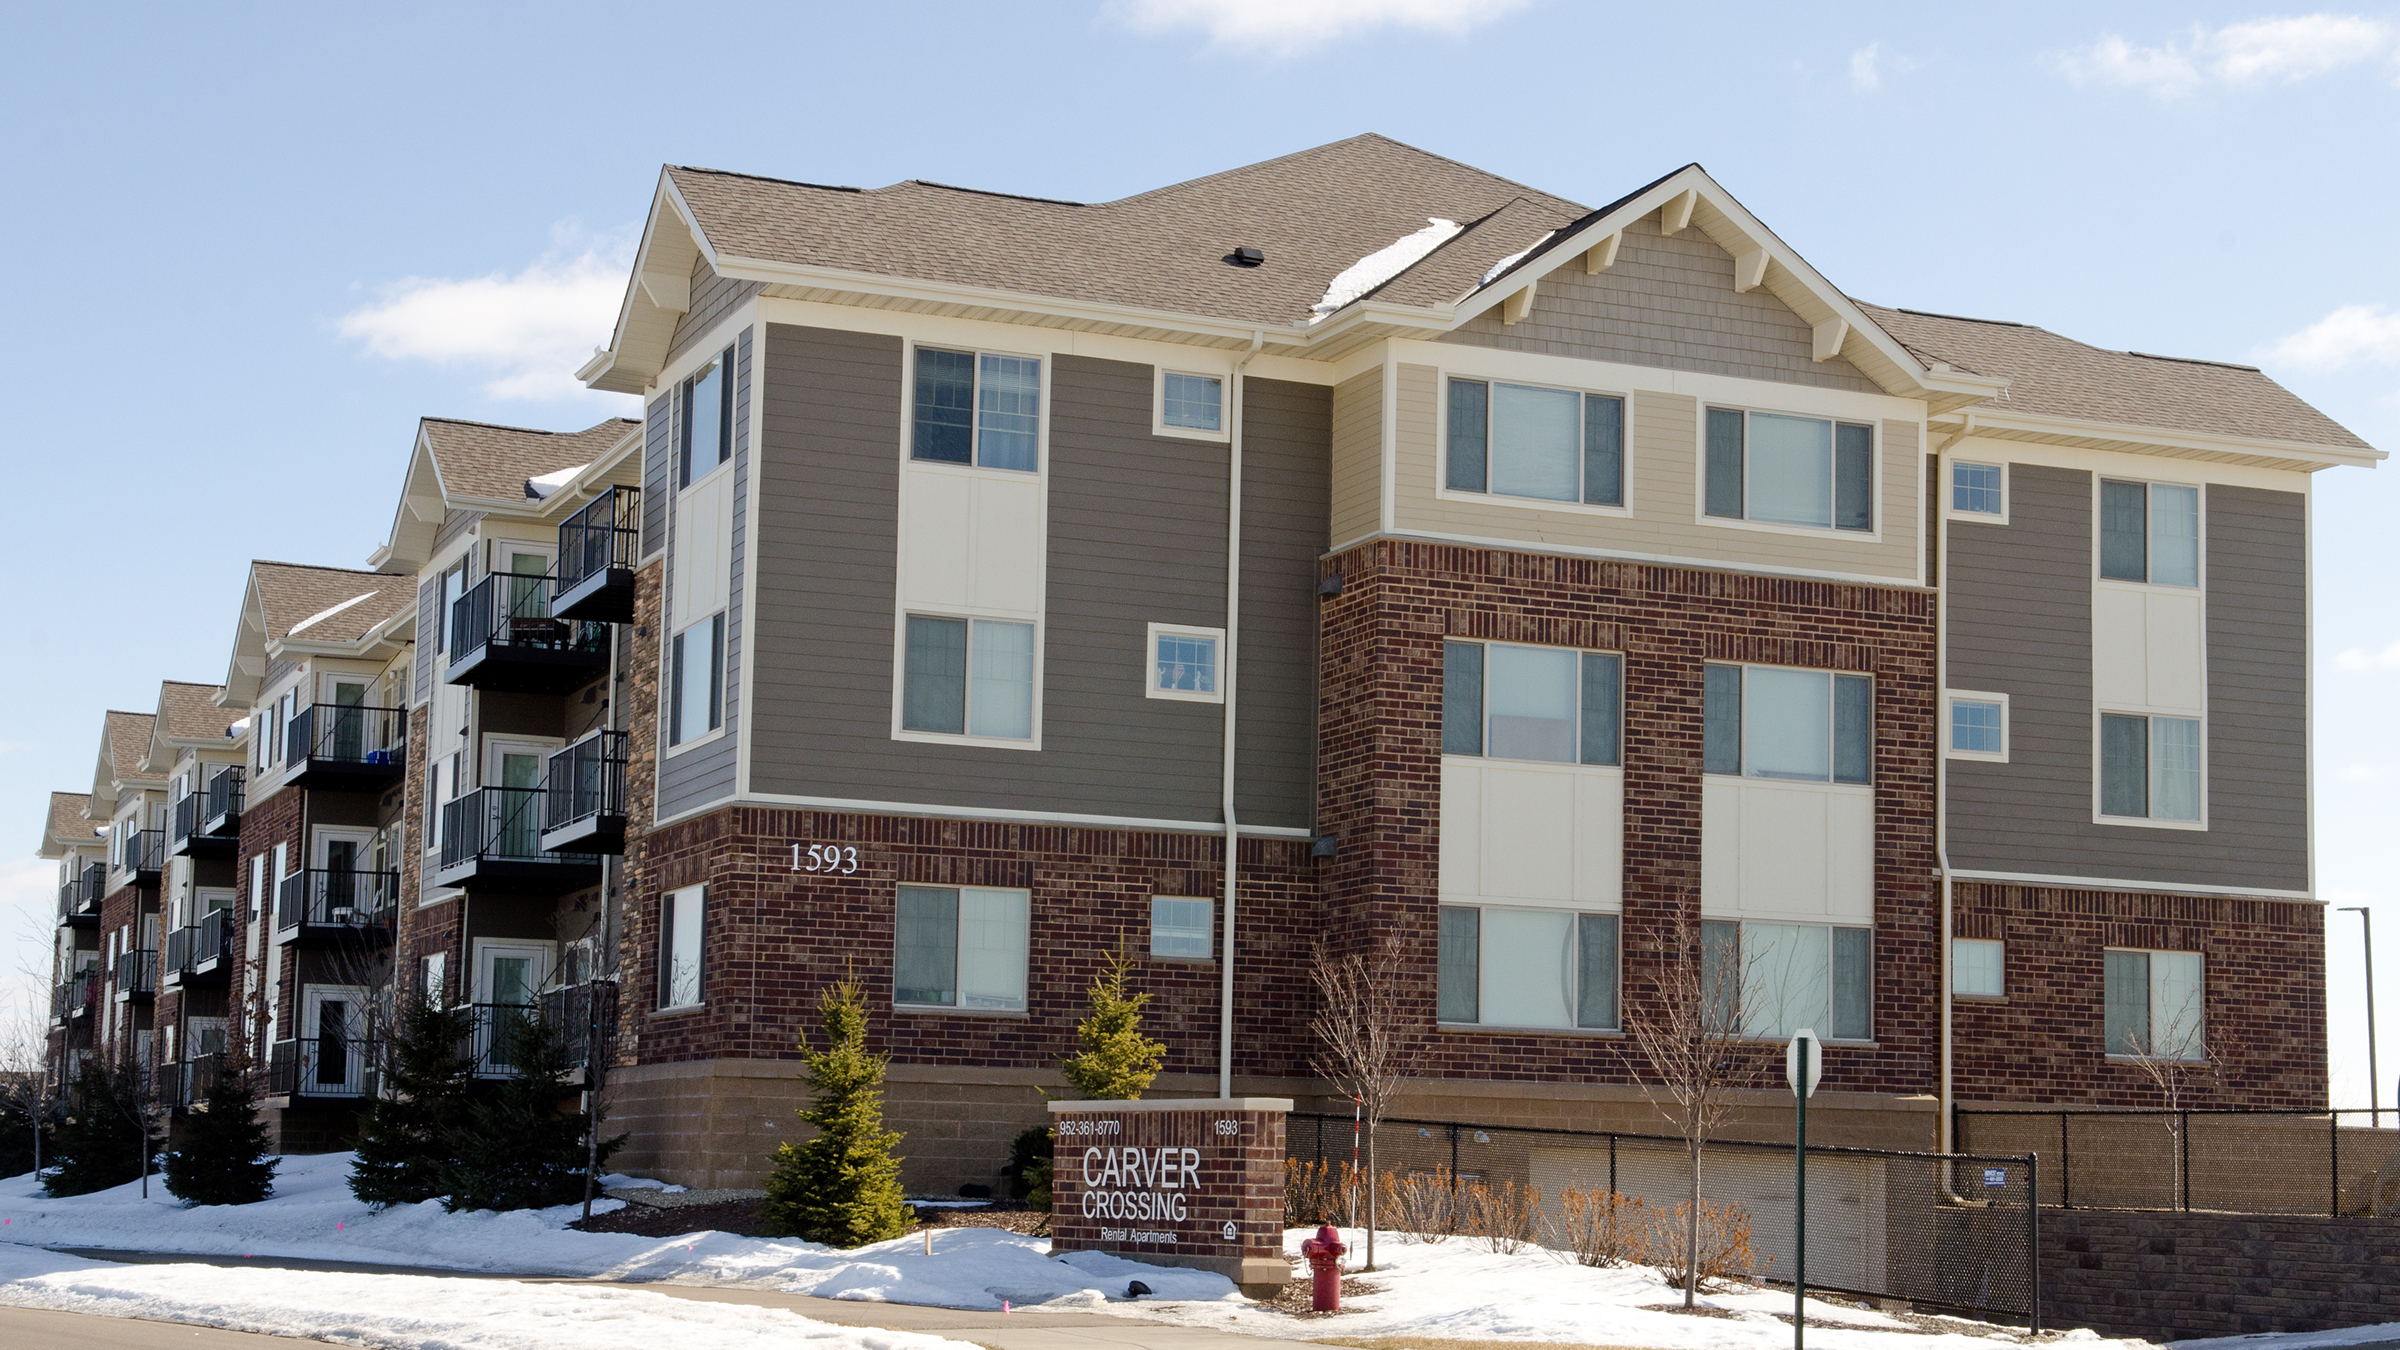 Once opposed by many neighbors, the Carver Crossing apartment complex in Carver, Minn., has become an accepted part of the community.